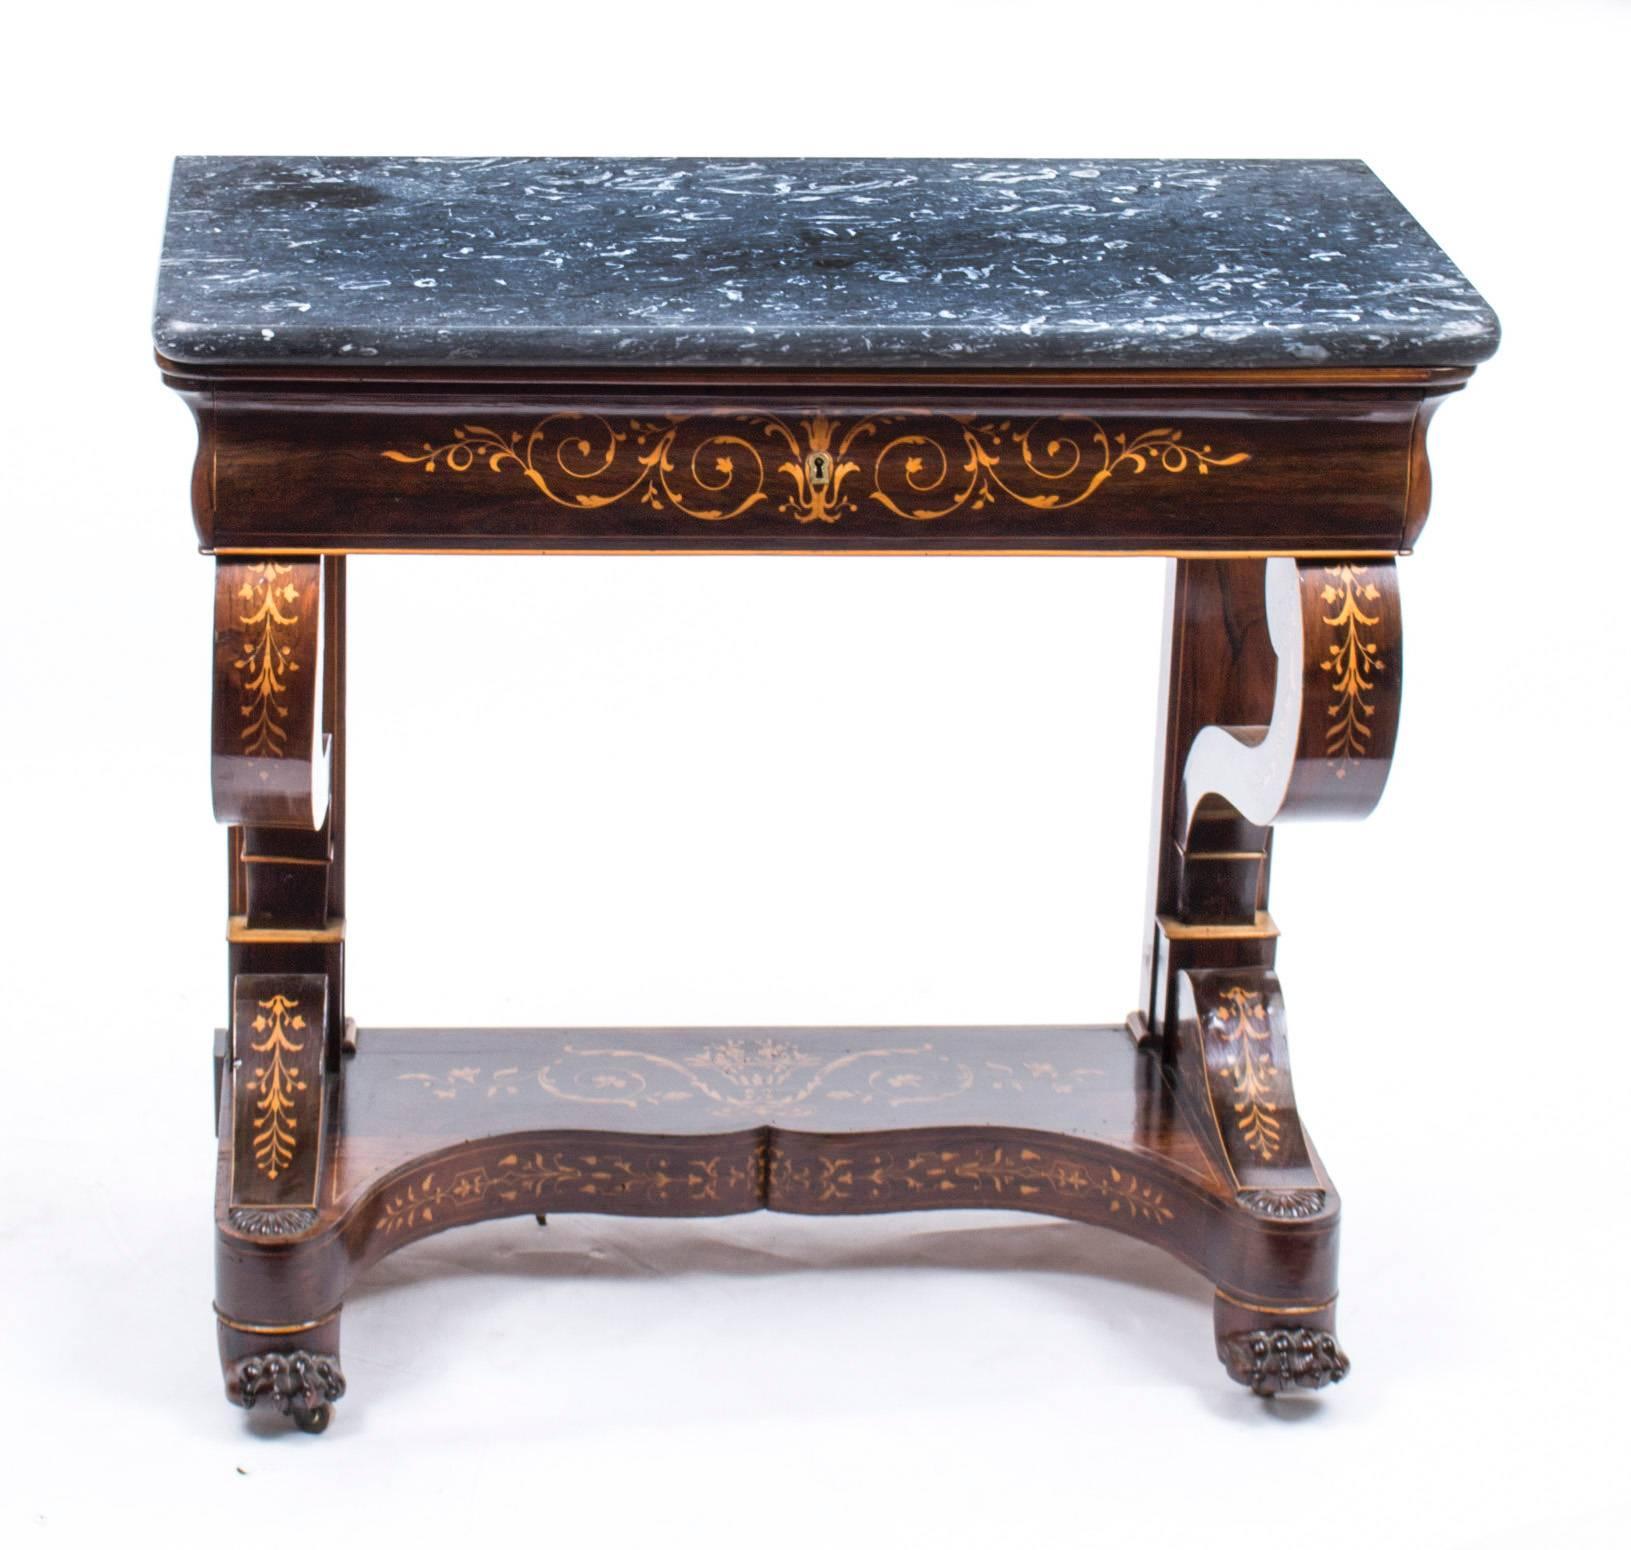 This is a very elegant and petite antique French Charles X period finely figured rosewood console table with superb inlaid satinwood marquetry decoration typical of the period, circa 1830 in date.

This beautiful console table retains its original